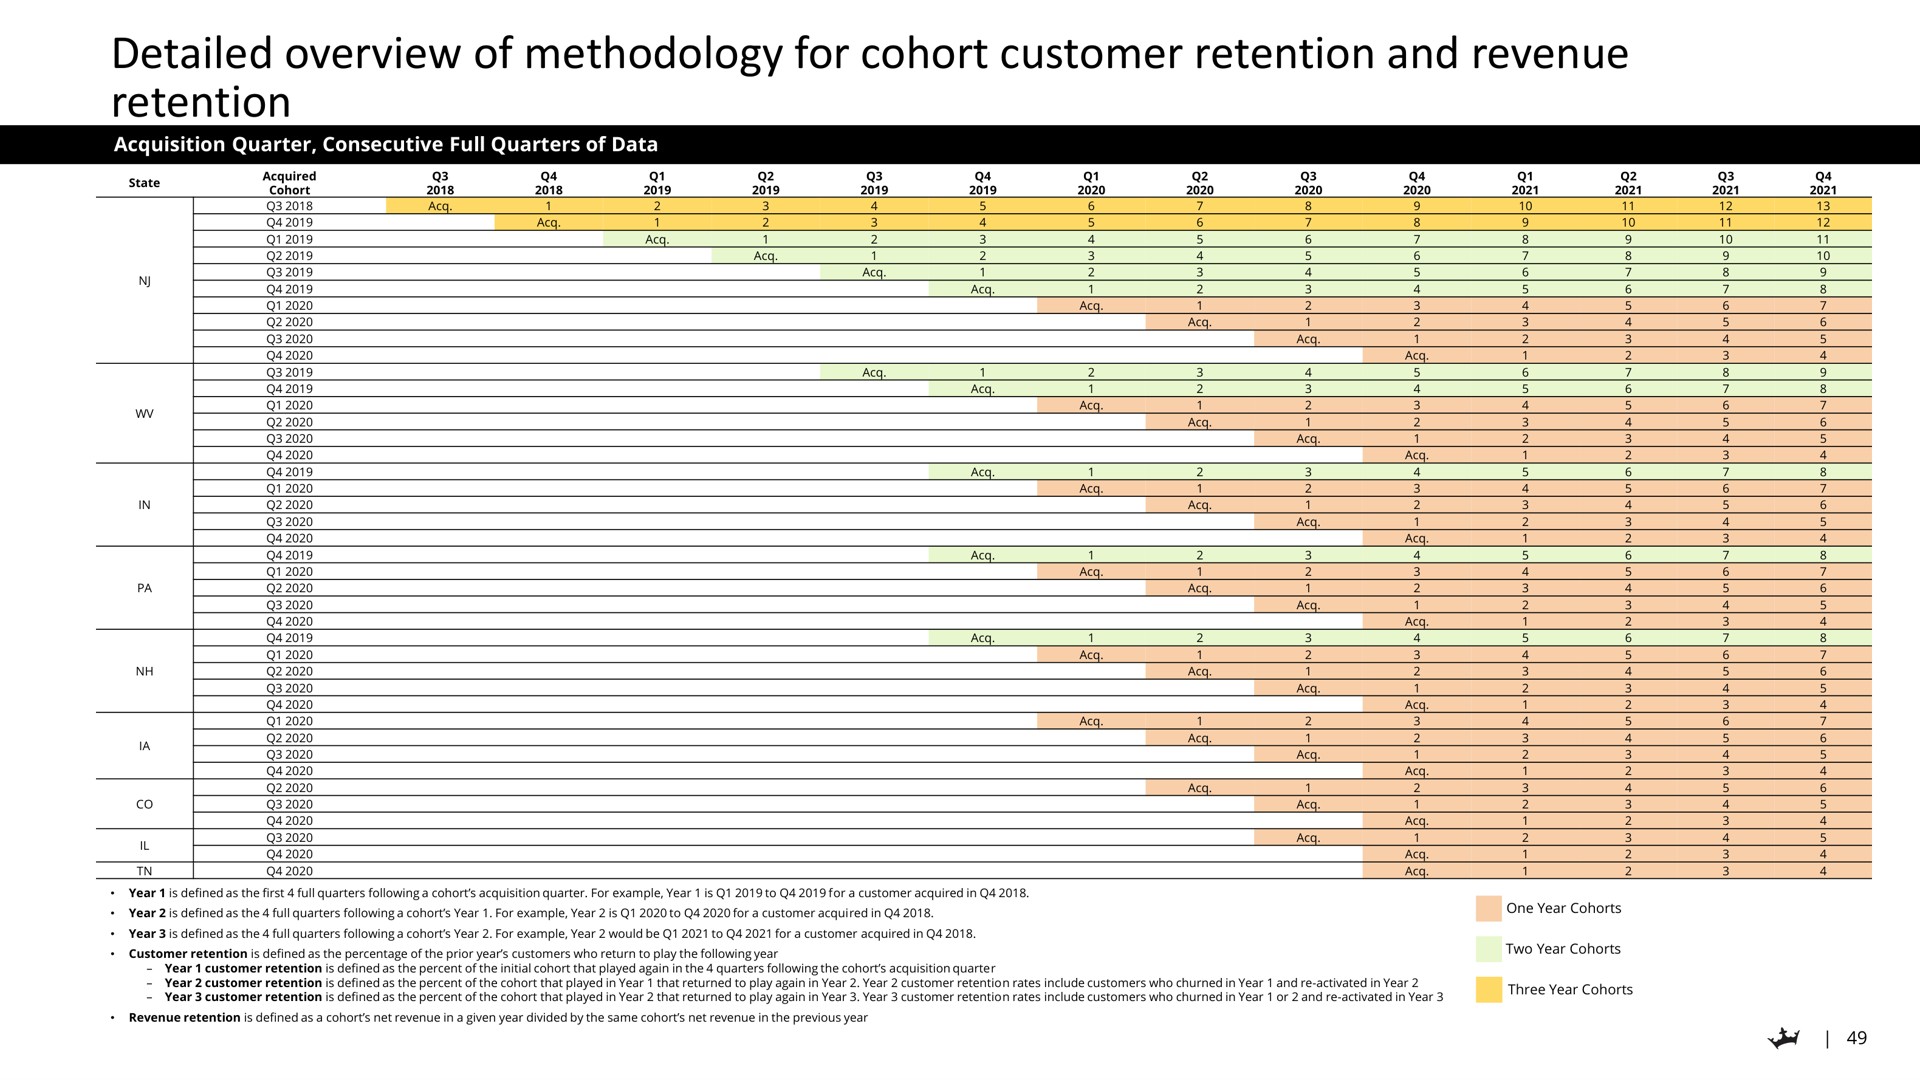 detailed overview of methodology for cohort customer retention and revenue retention | DraftKings